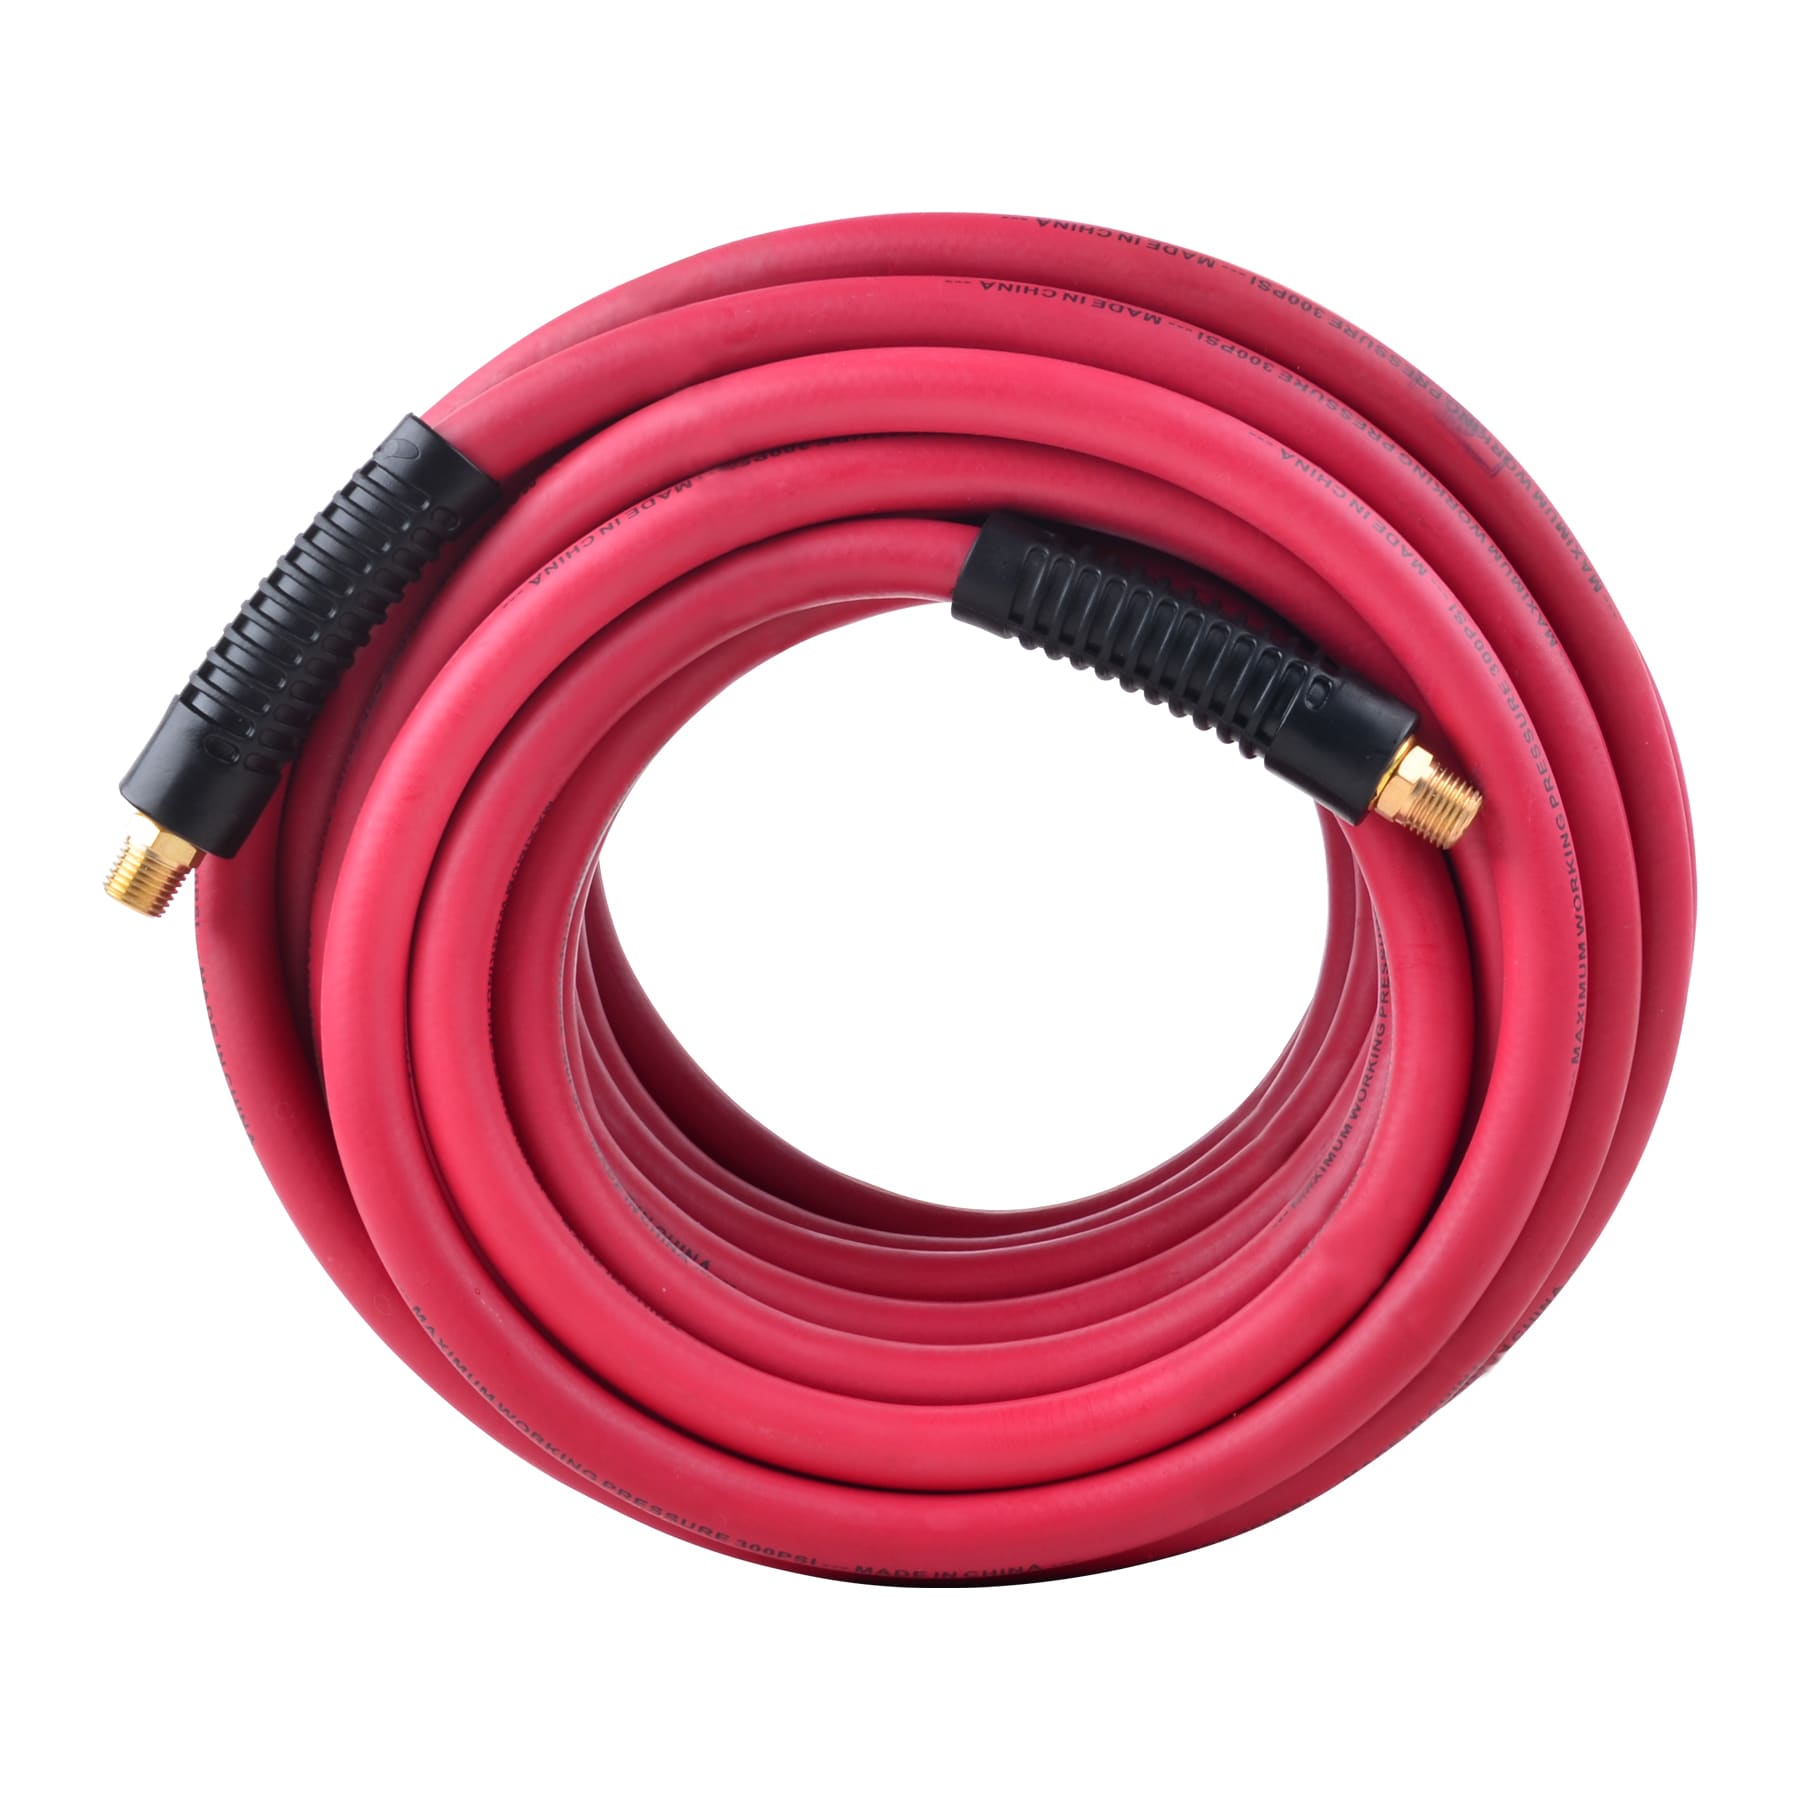 CRAFTSMAN CRAFTSMAN 3/8-in x 50-Ft Rubber Air Hose at